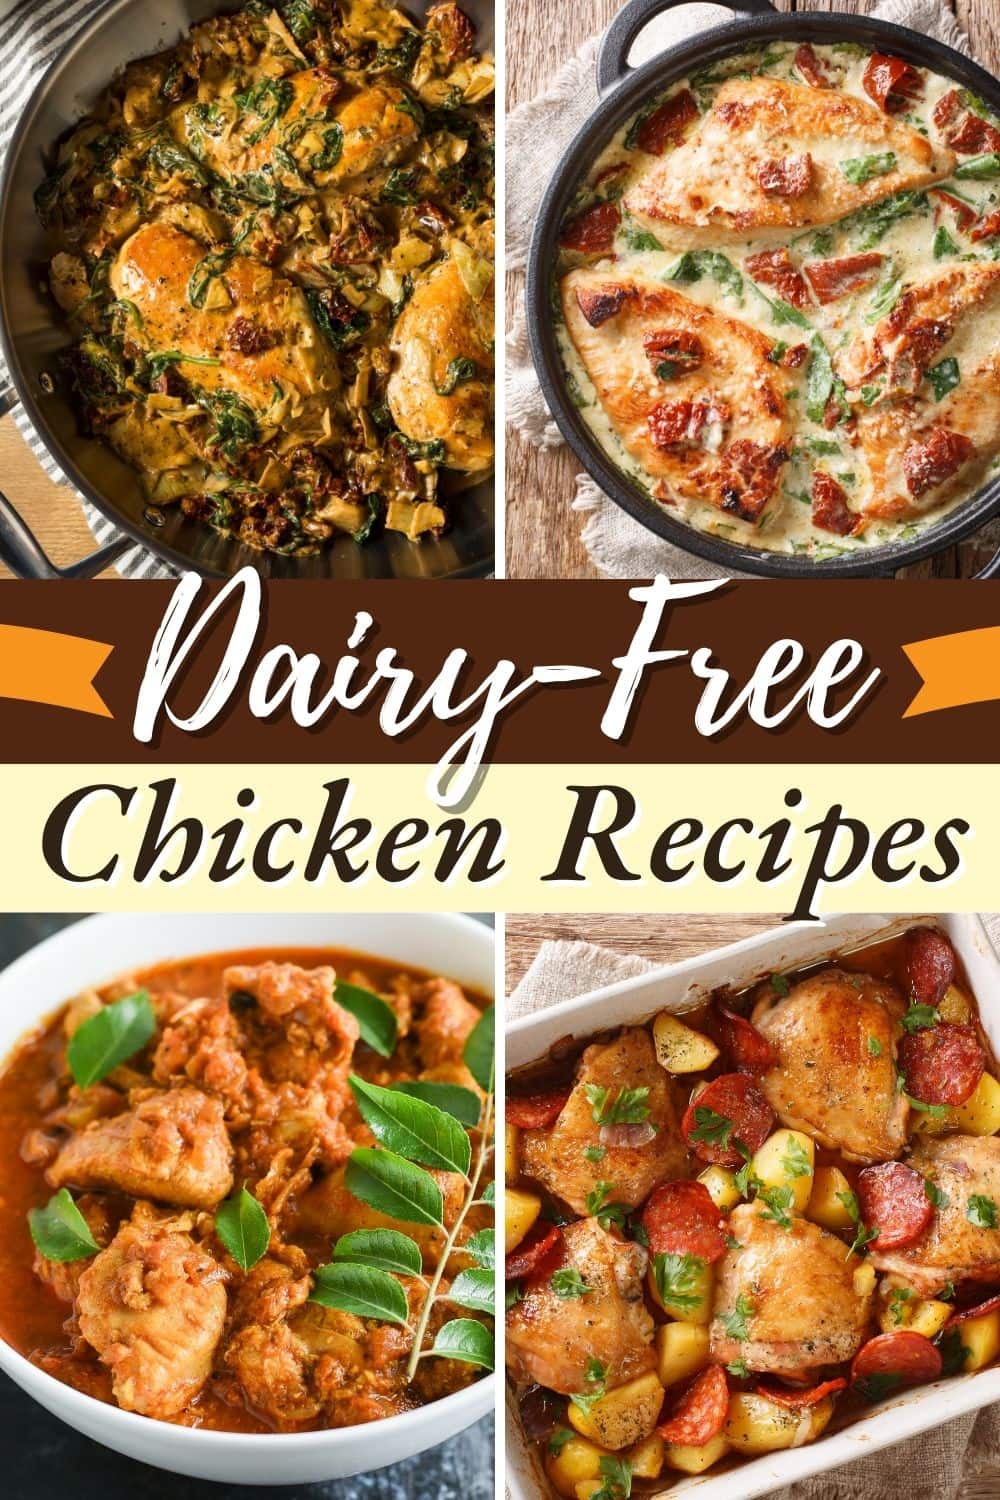 20 Easy Dairy-Free Chicken Recipes - Insanely Good